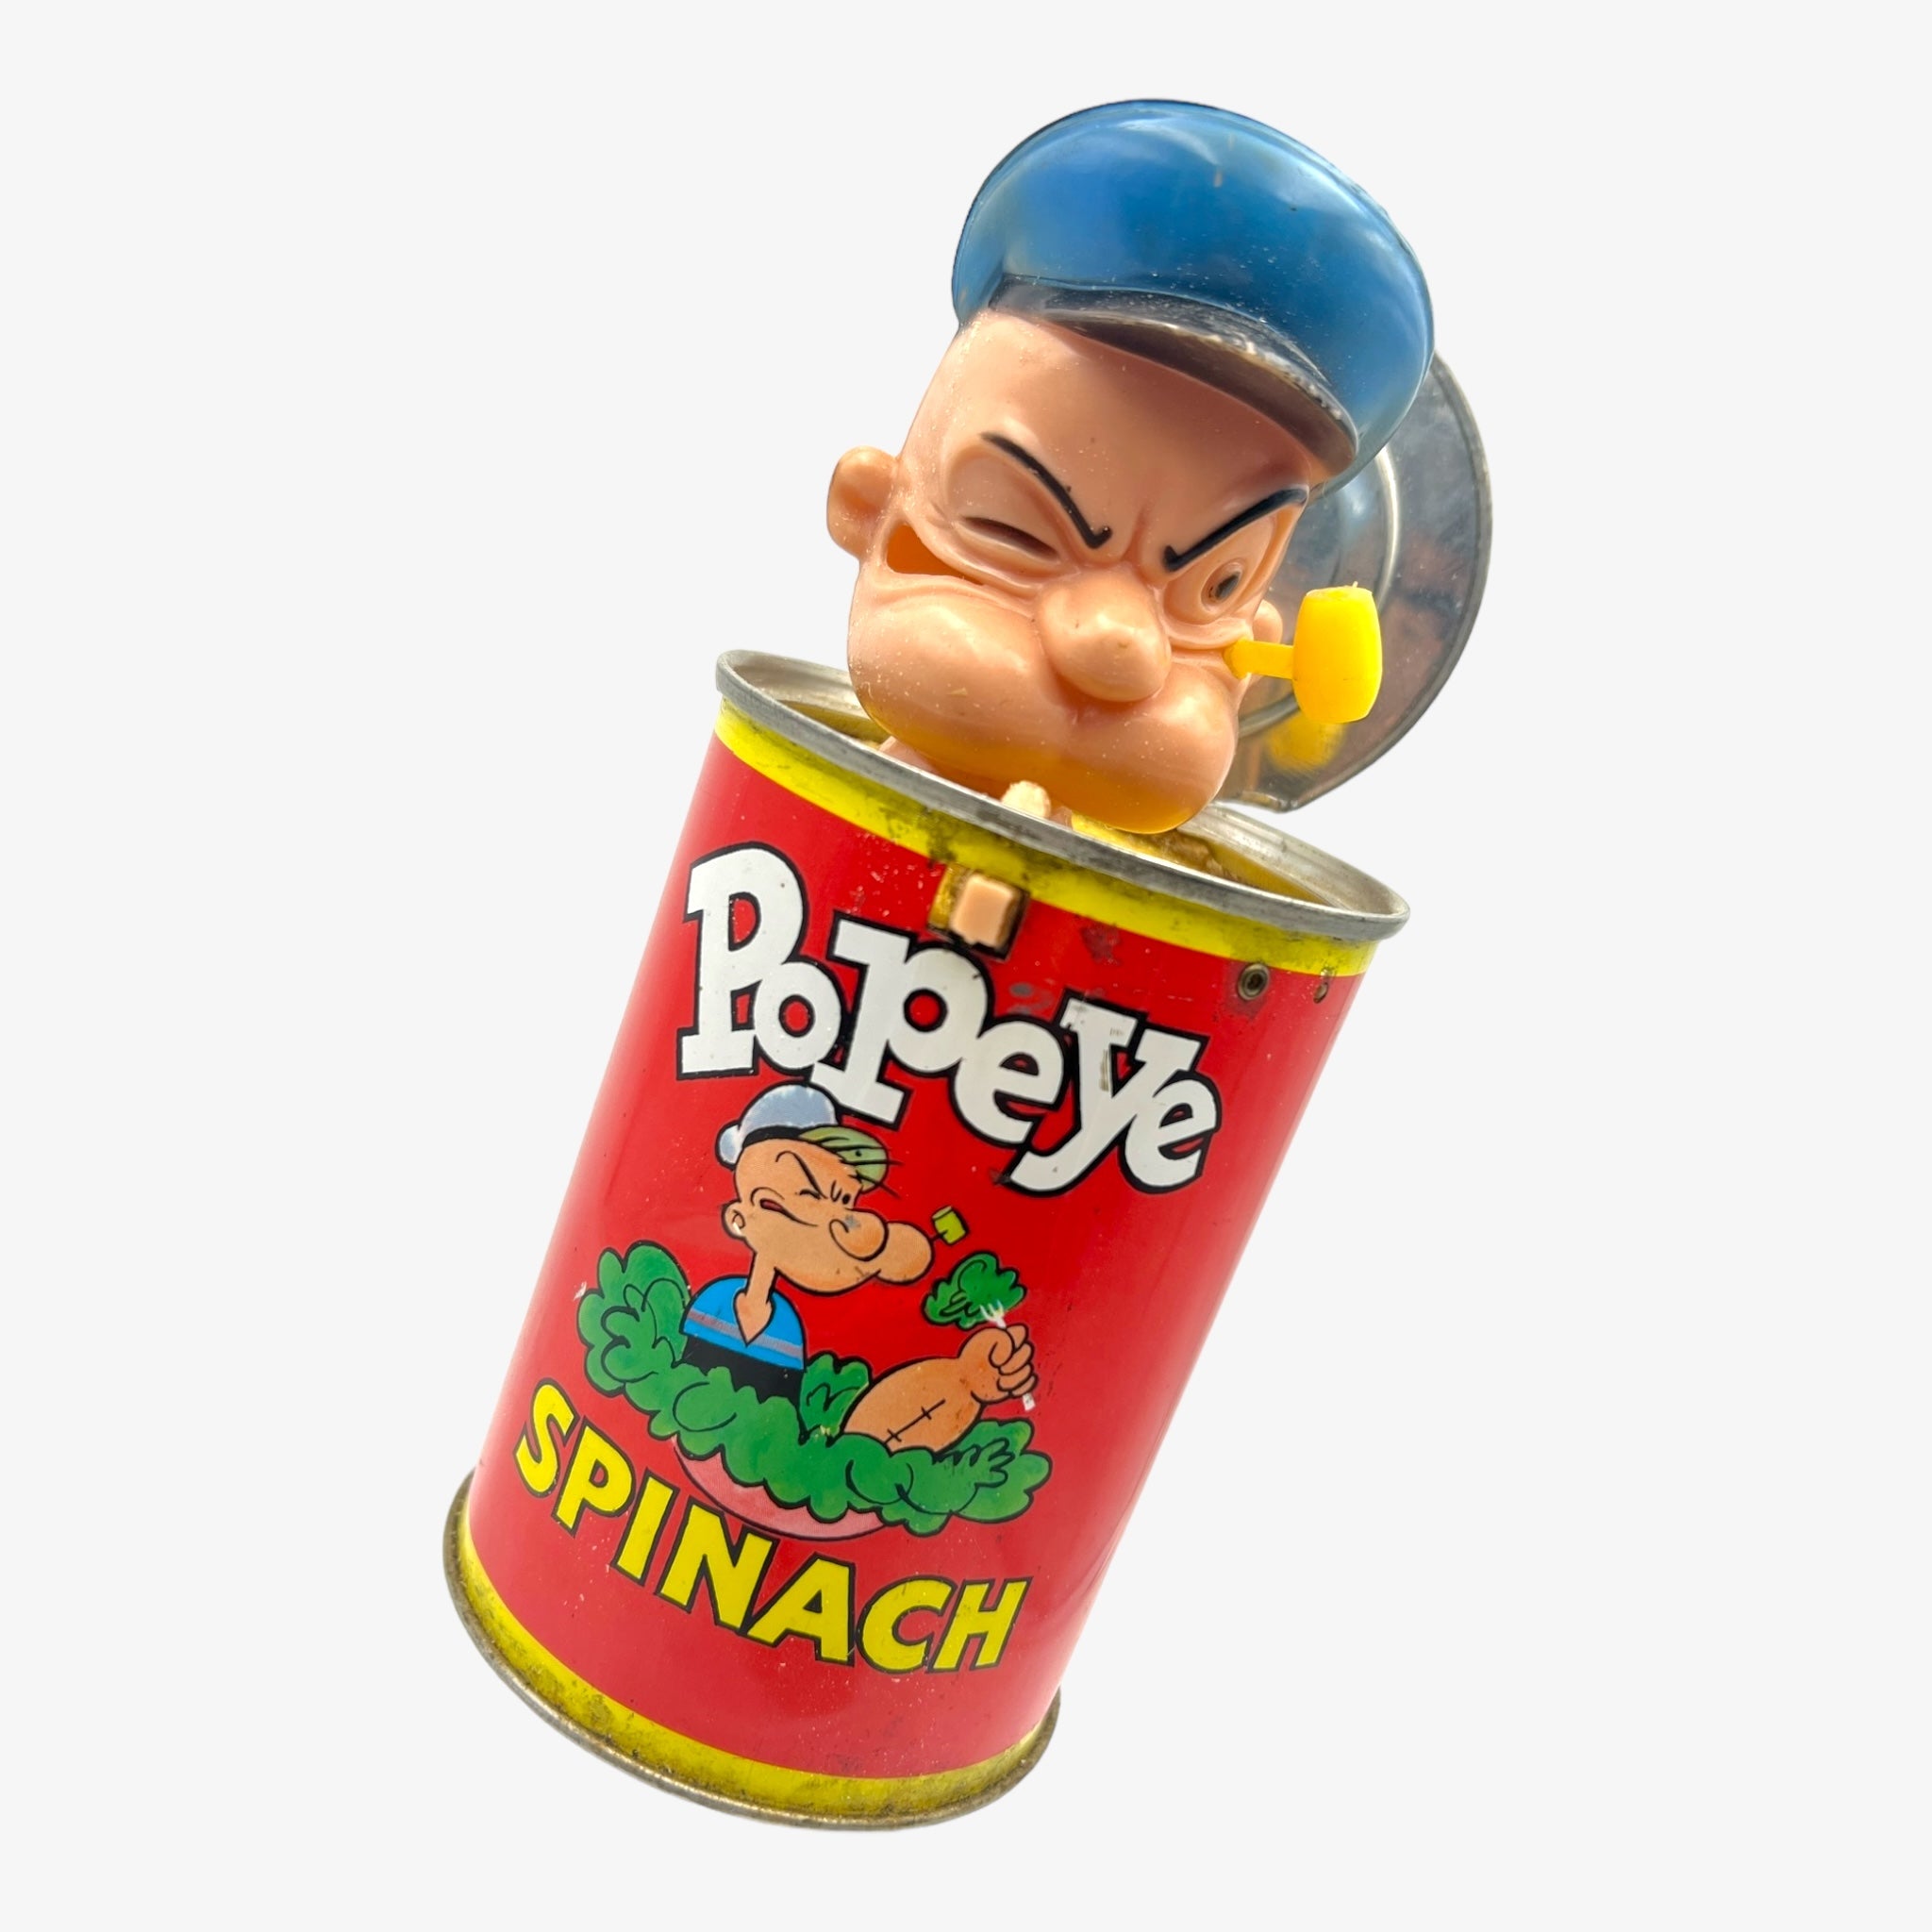 Rare Vintage 1957 Popeye Spinach Can